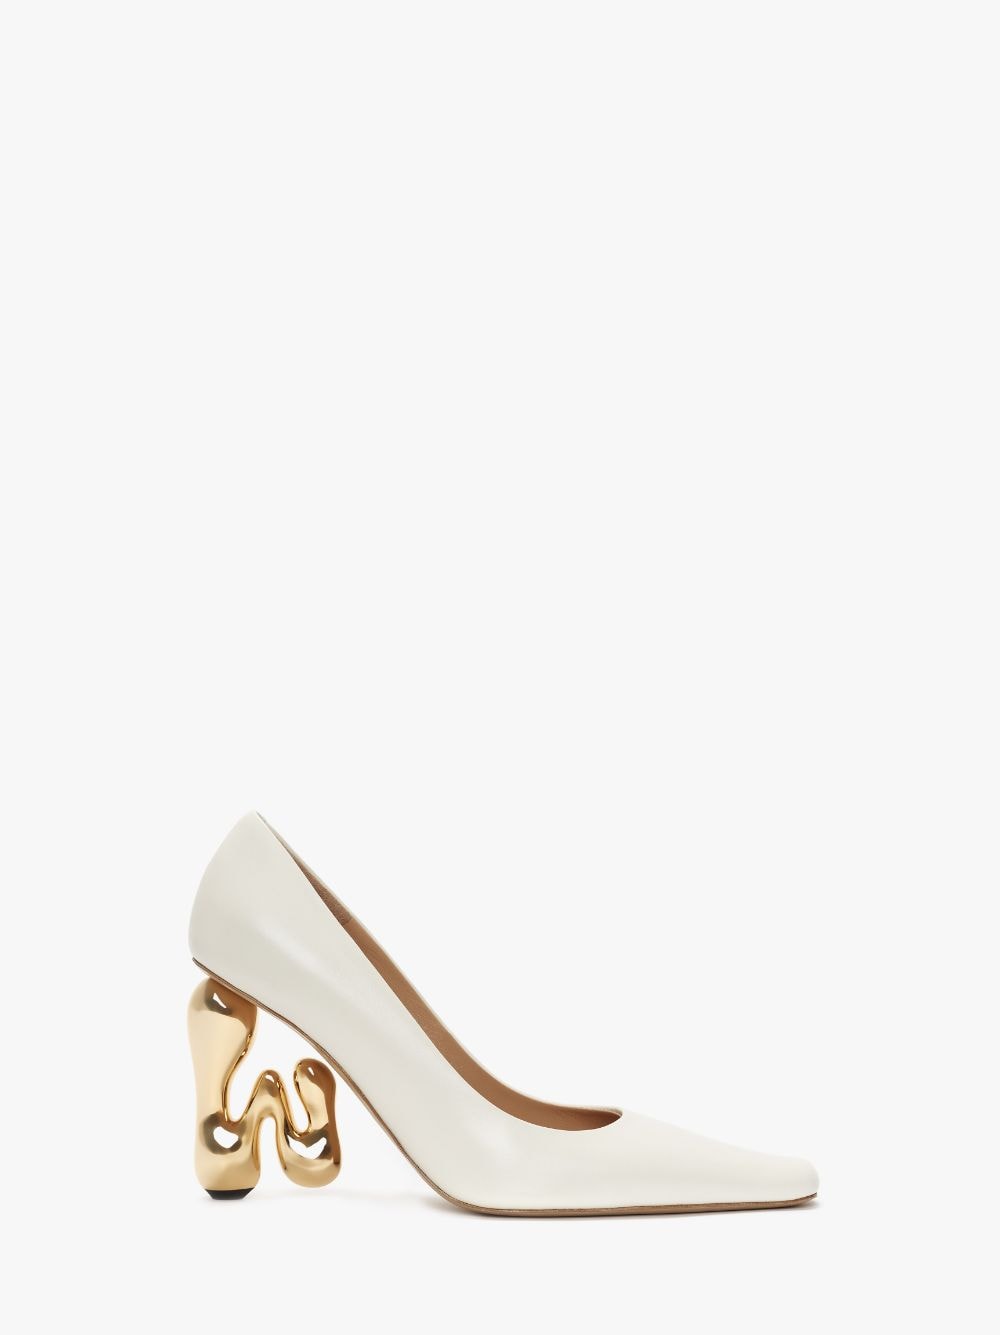 JW BUBBLE HEEL LEATHER PUMPS in white | JW Anderson SG